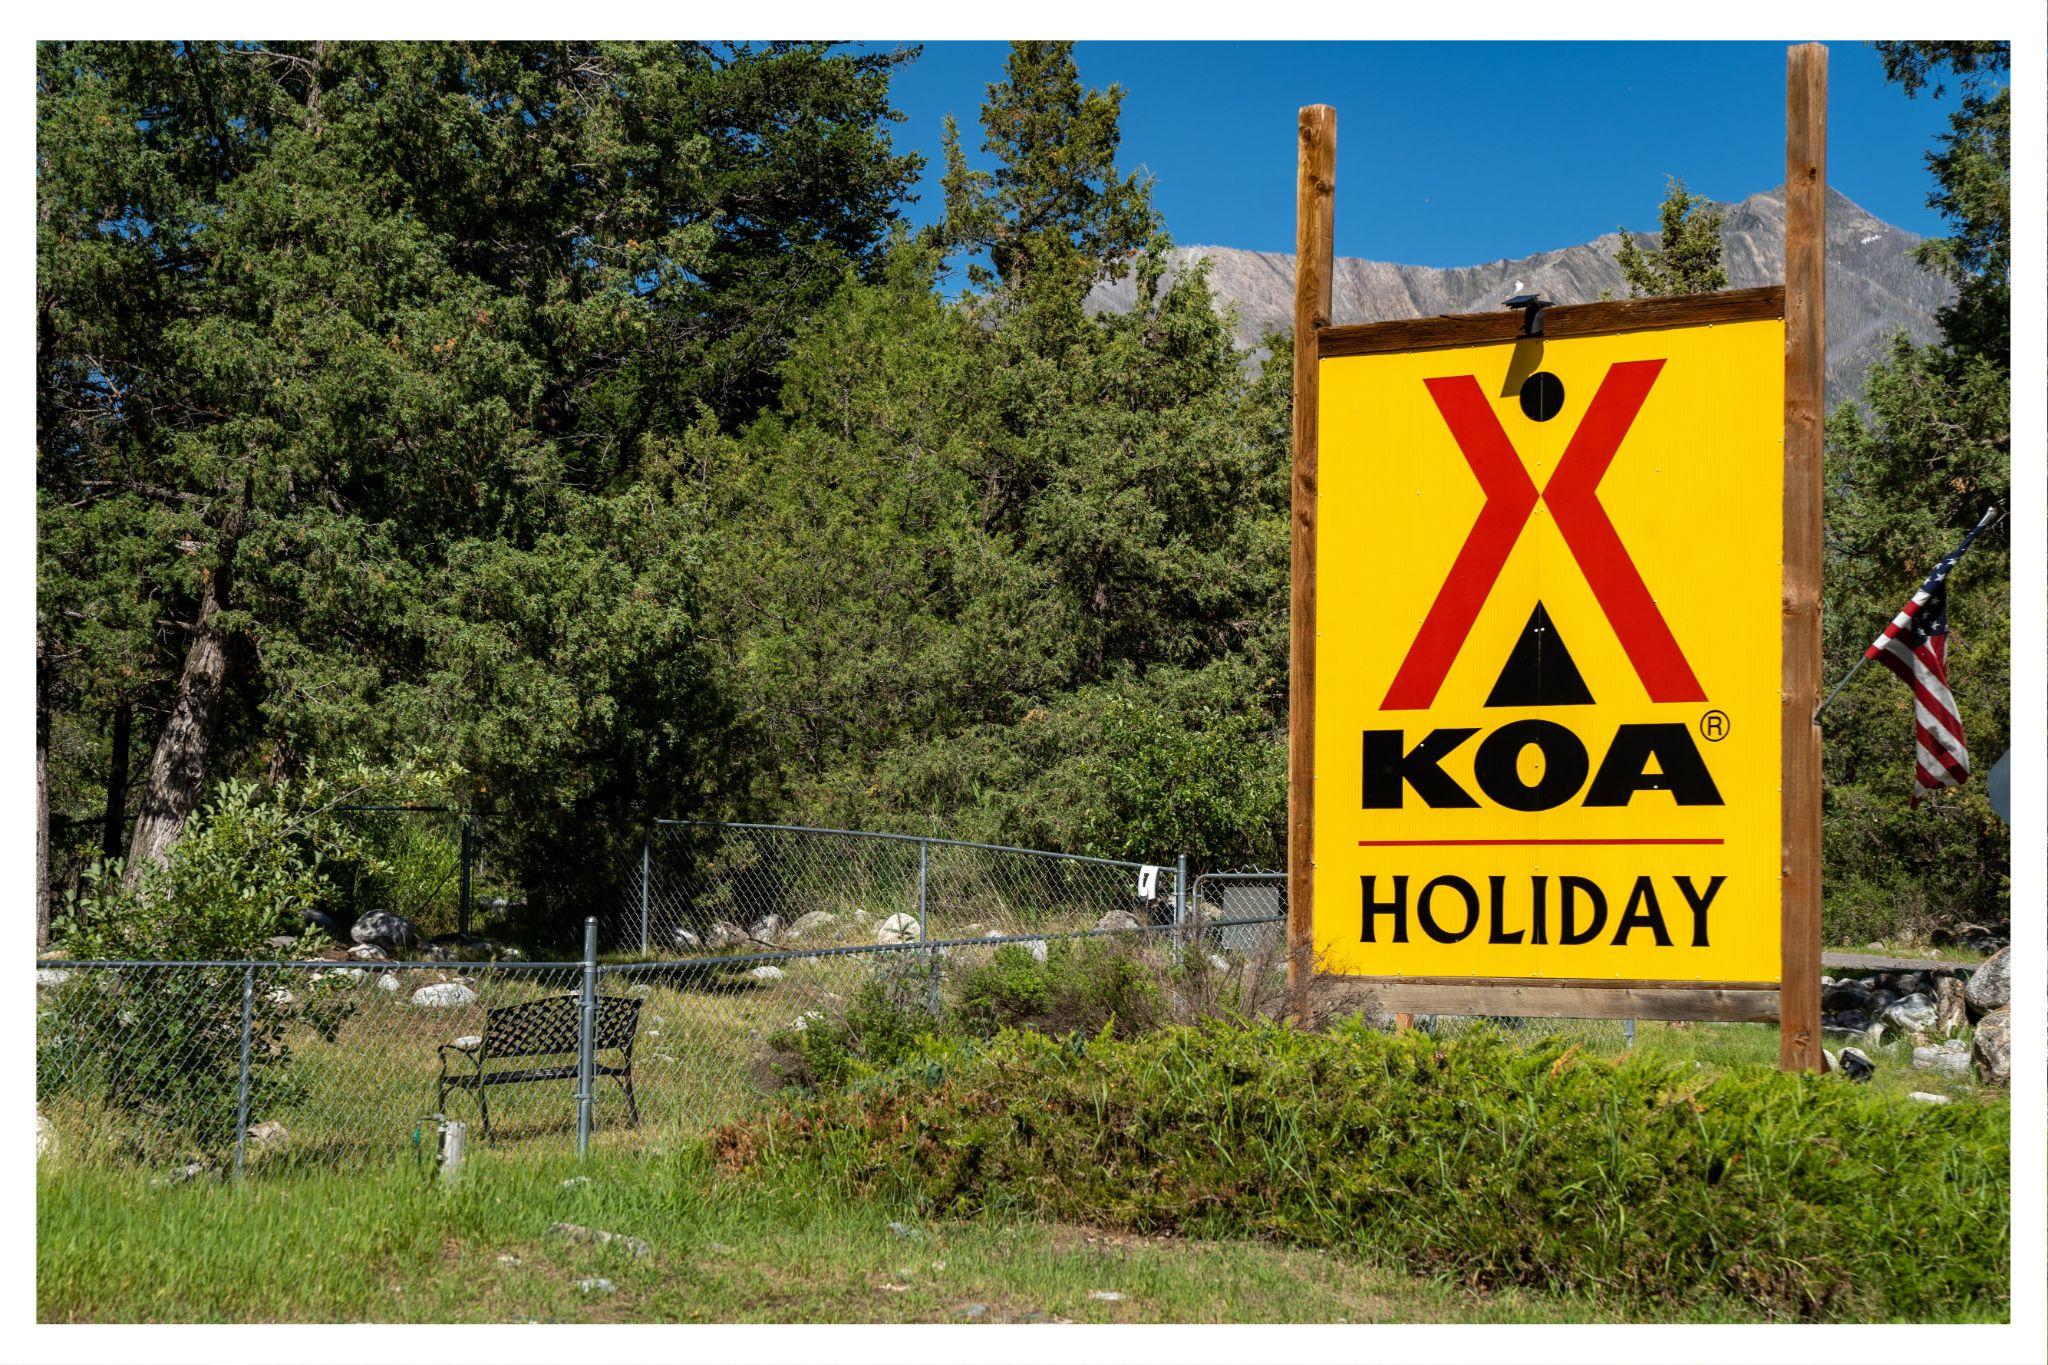 KOA holiday campgrounds are very family friendly and great for your Carefree RV trip